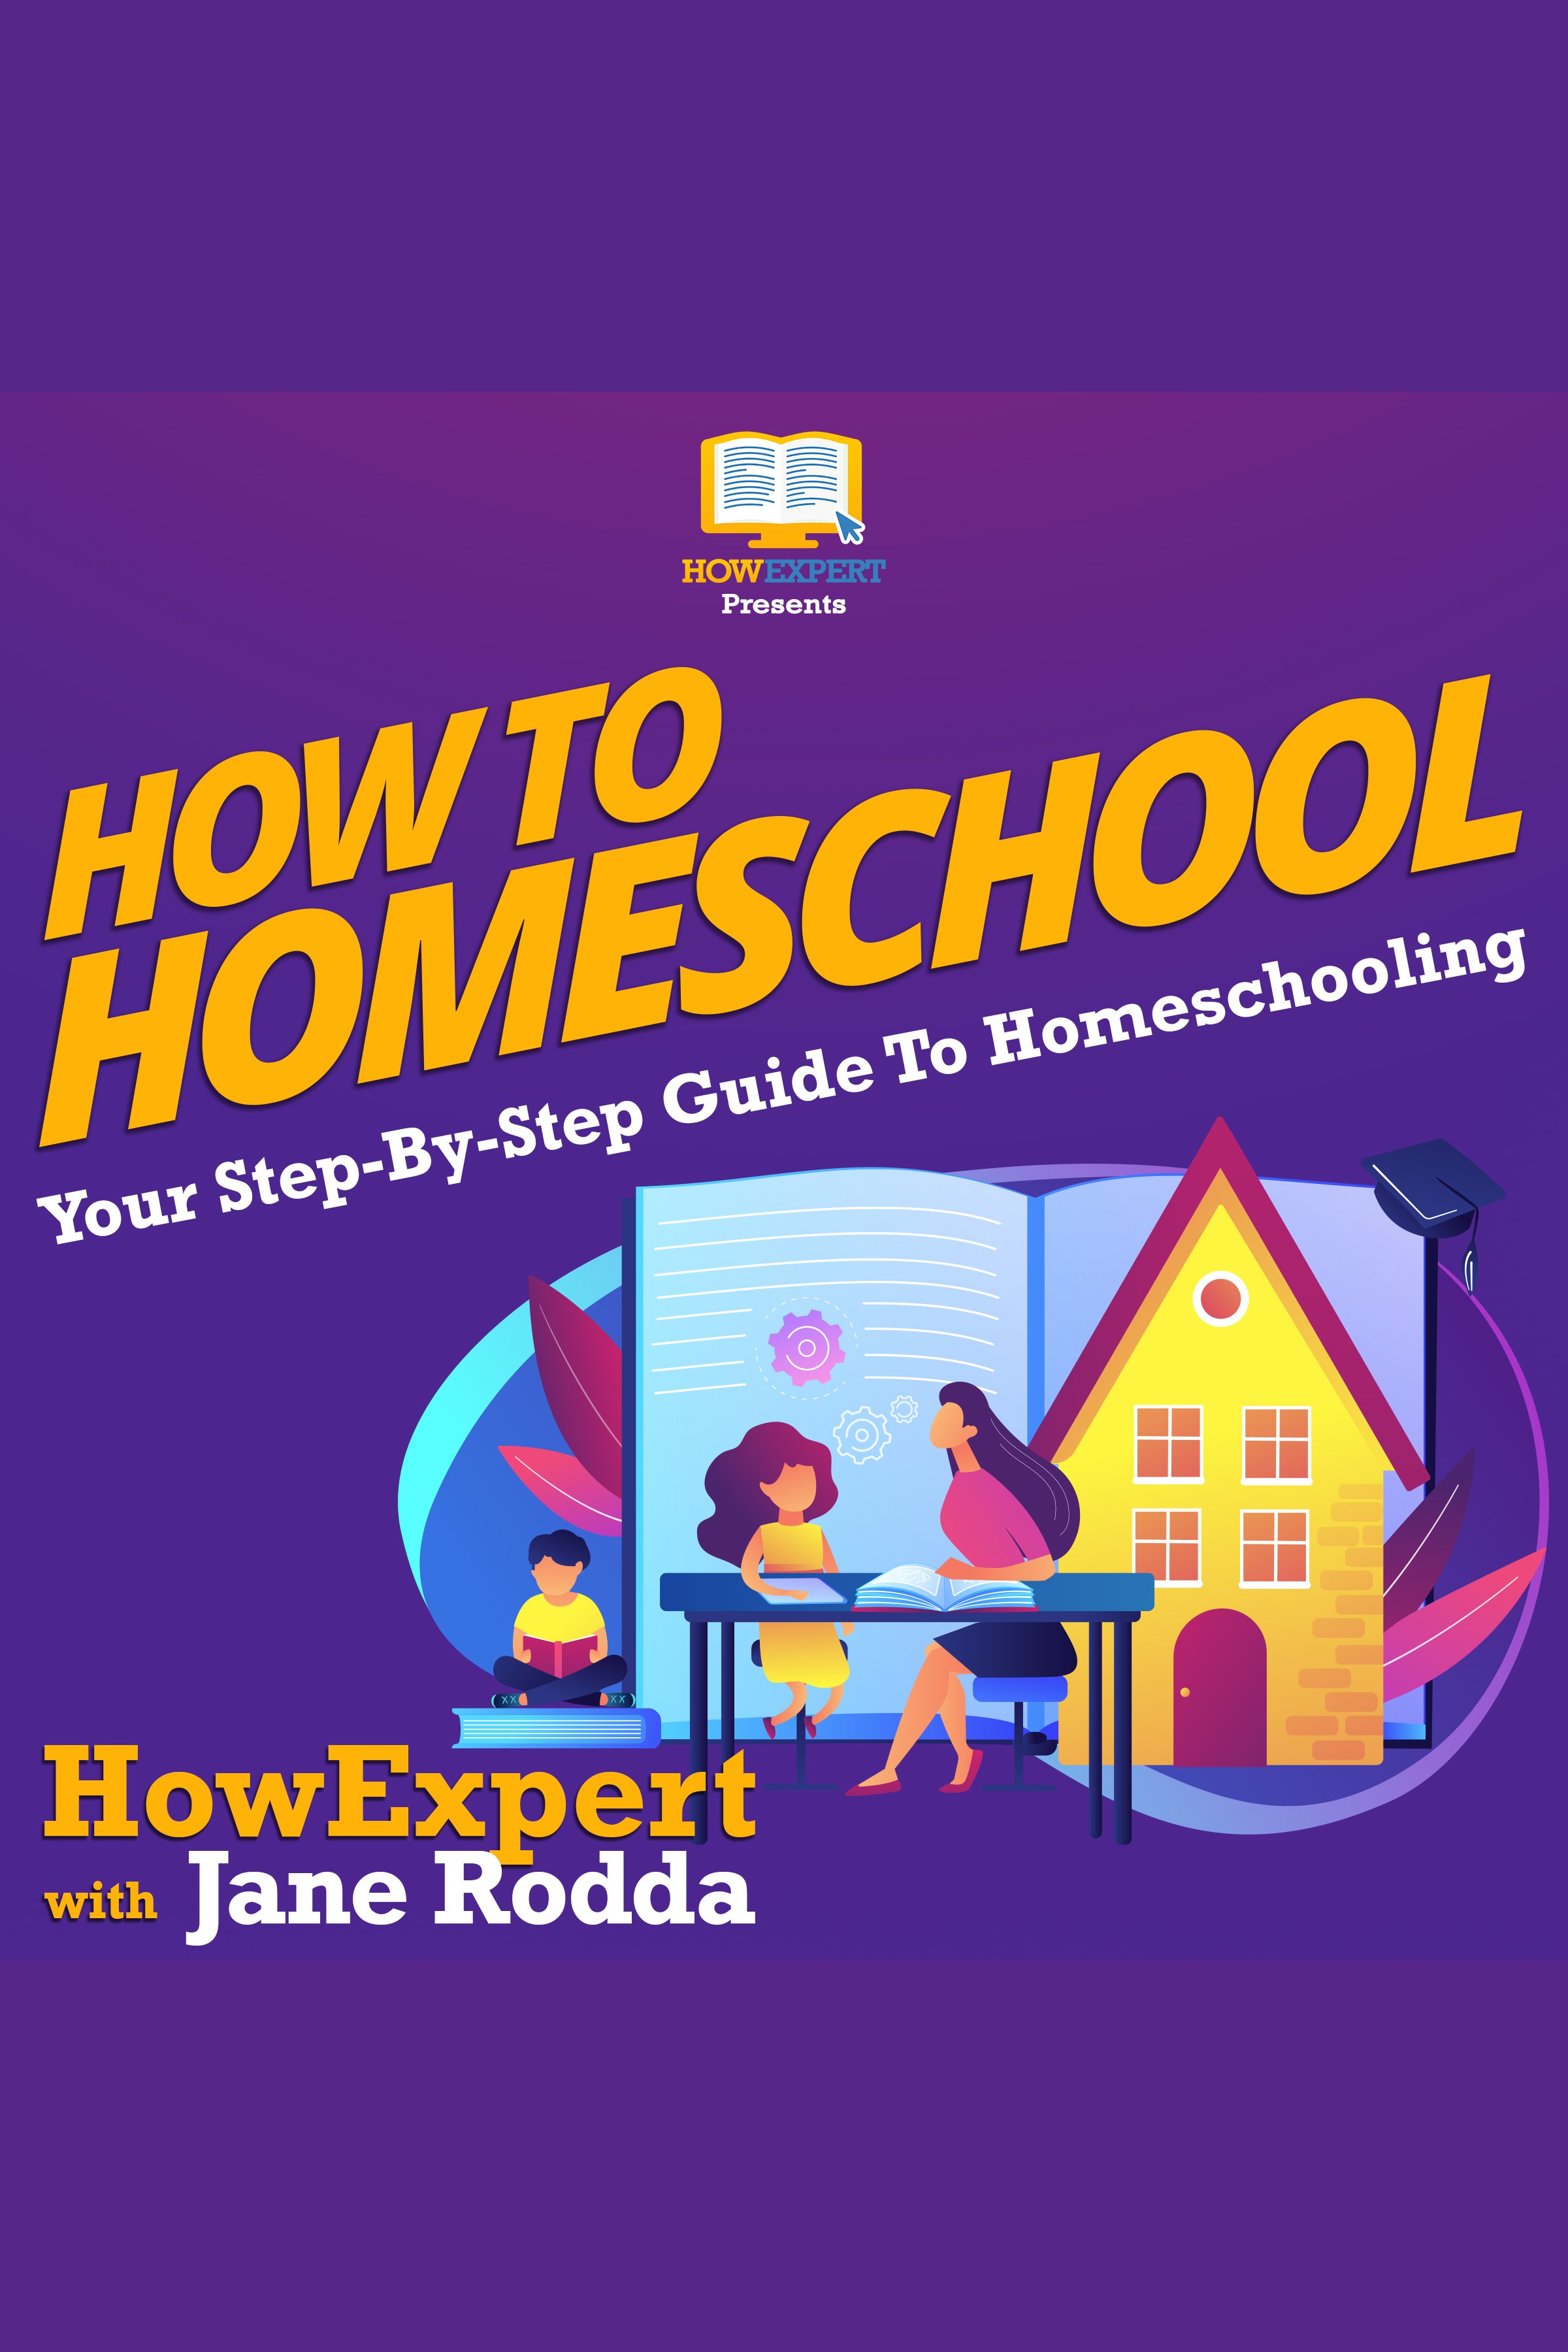 How to homeschool your step by step guide to homeschooling cover image